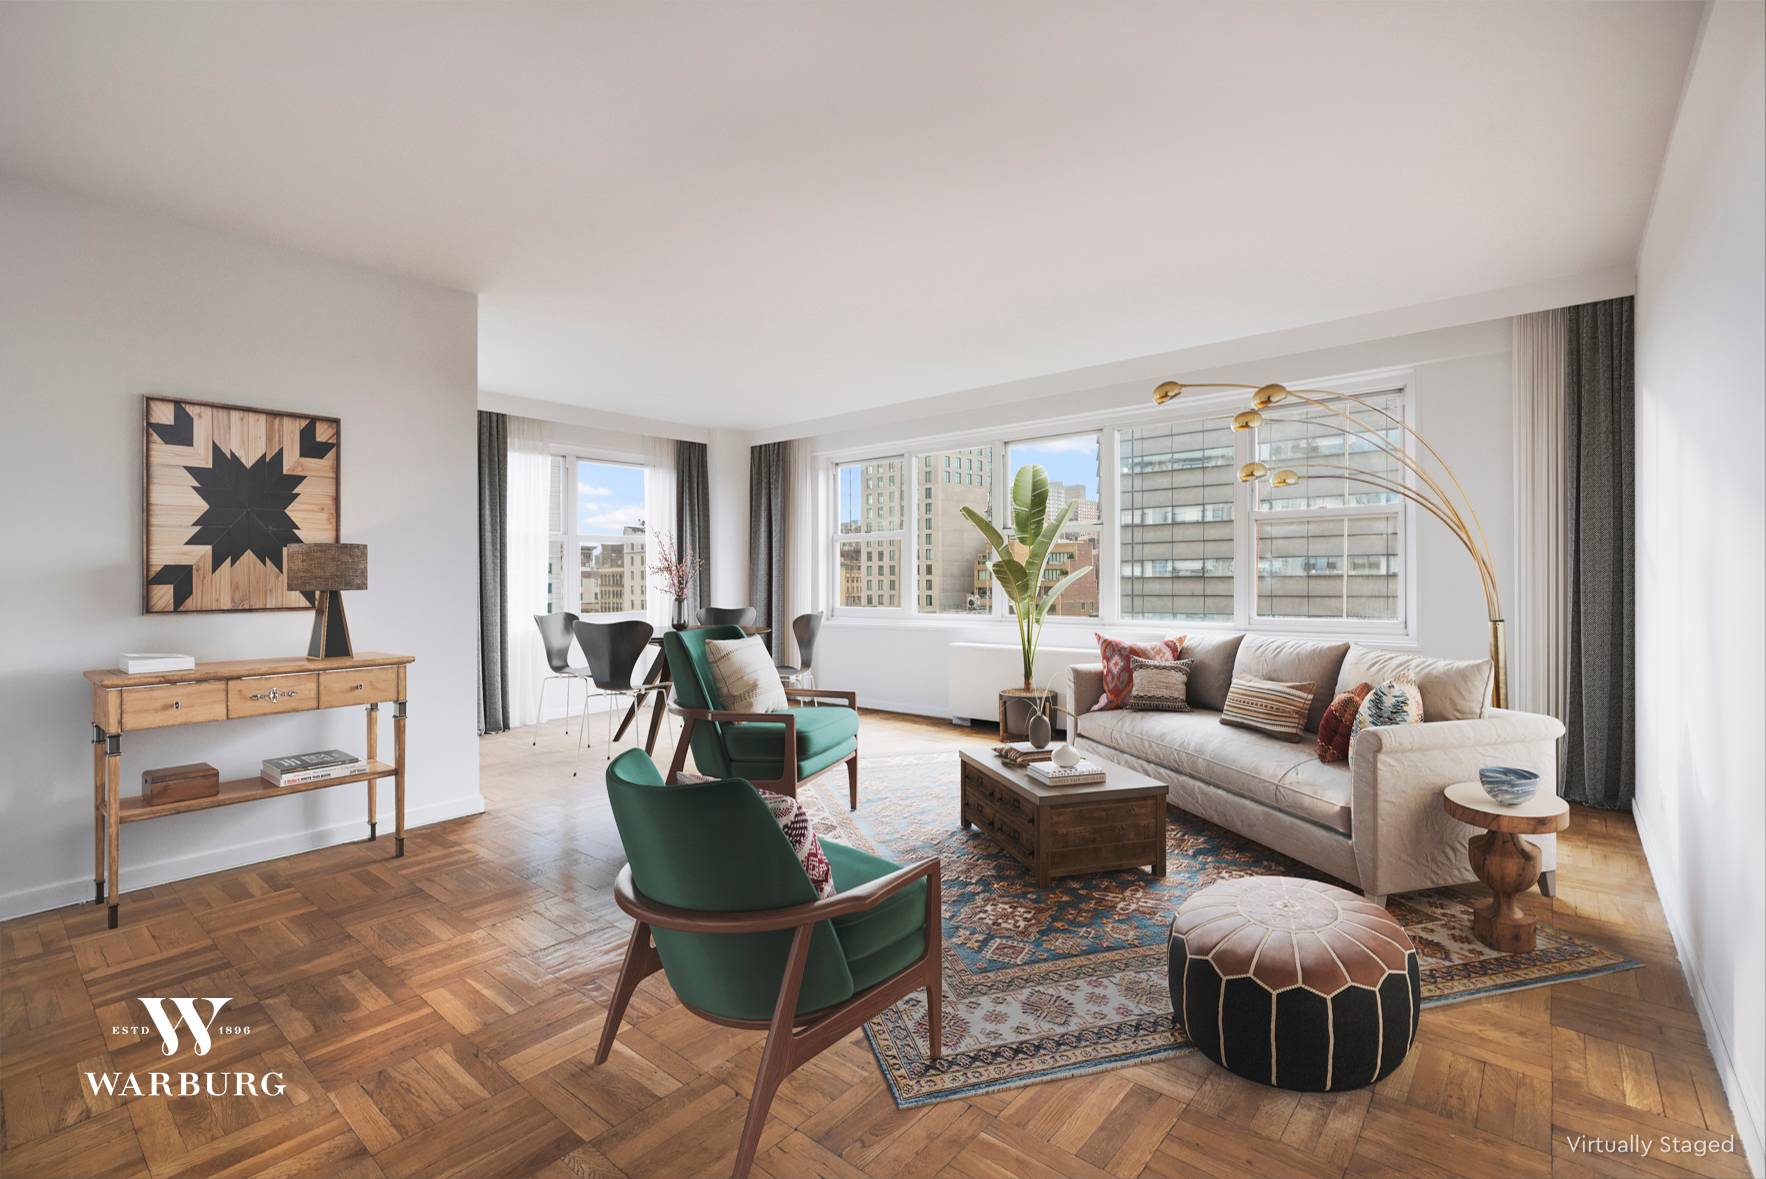 Set high over Fifth Avenue, this midcentury gem one block from Union Square awaits your design.